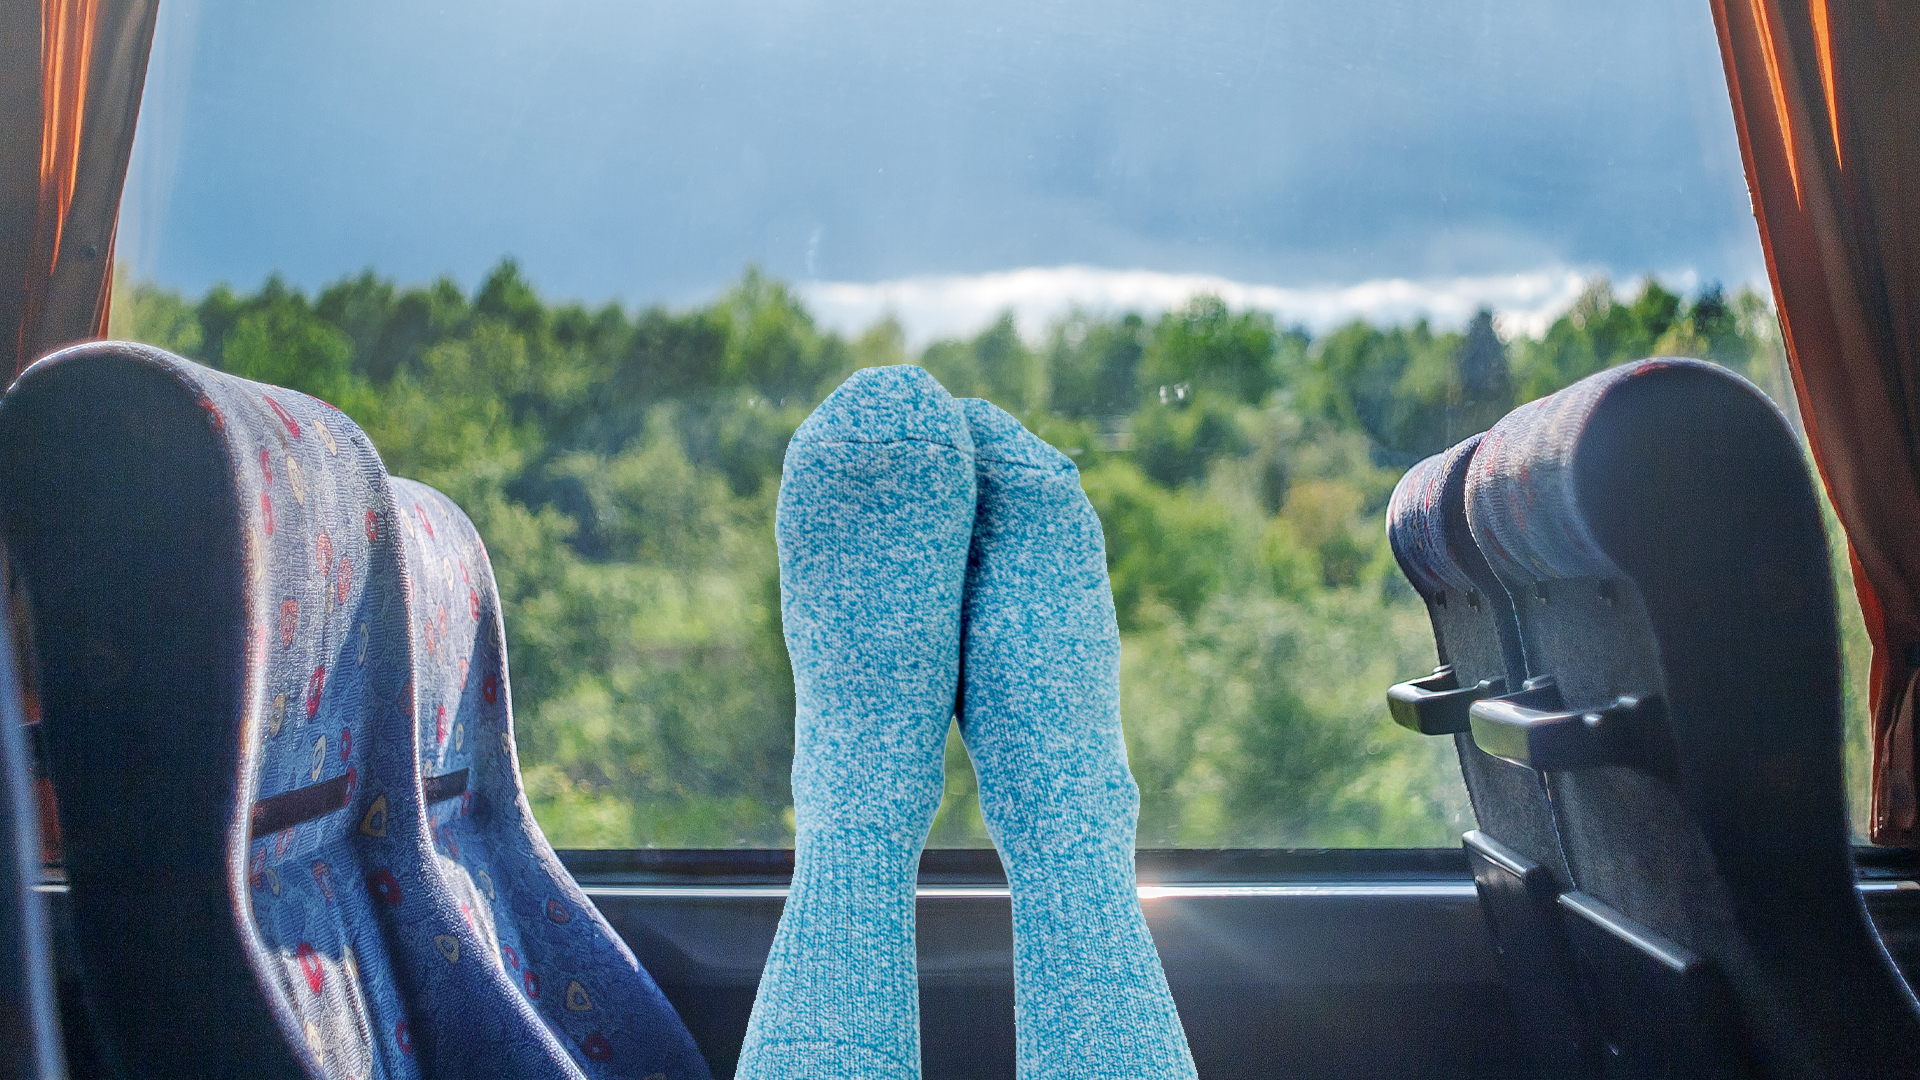 A pair of feet in socks relaxing on a bus